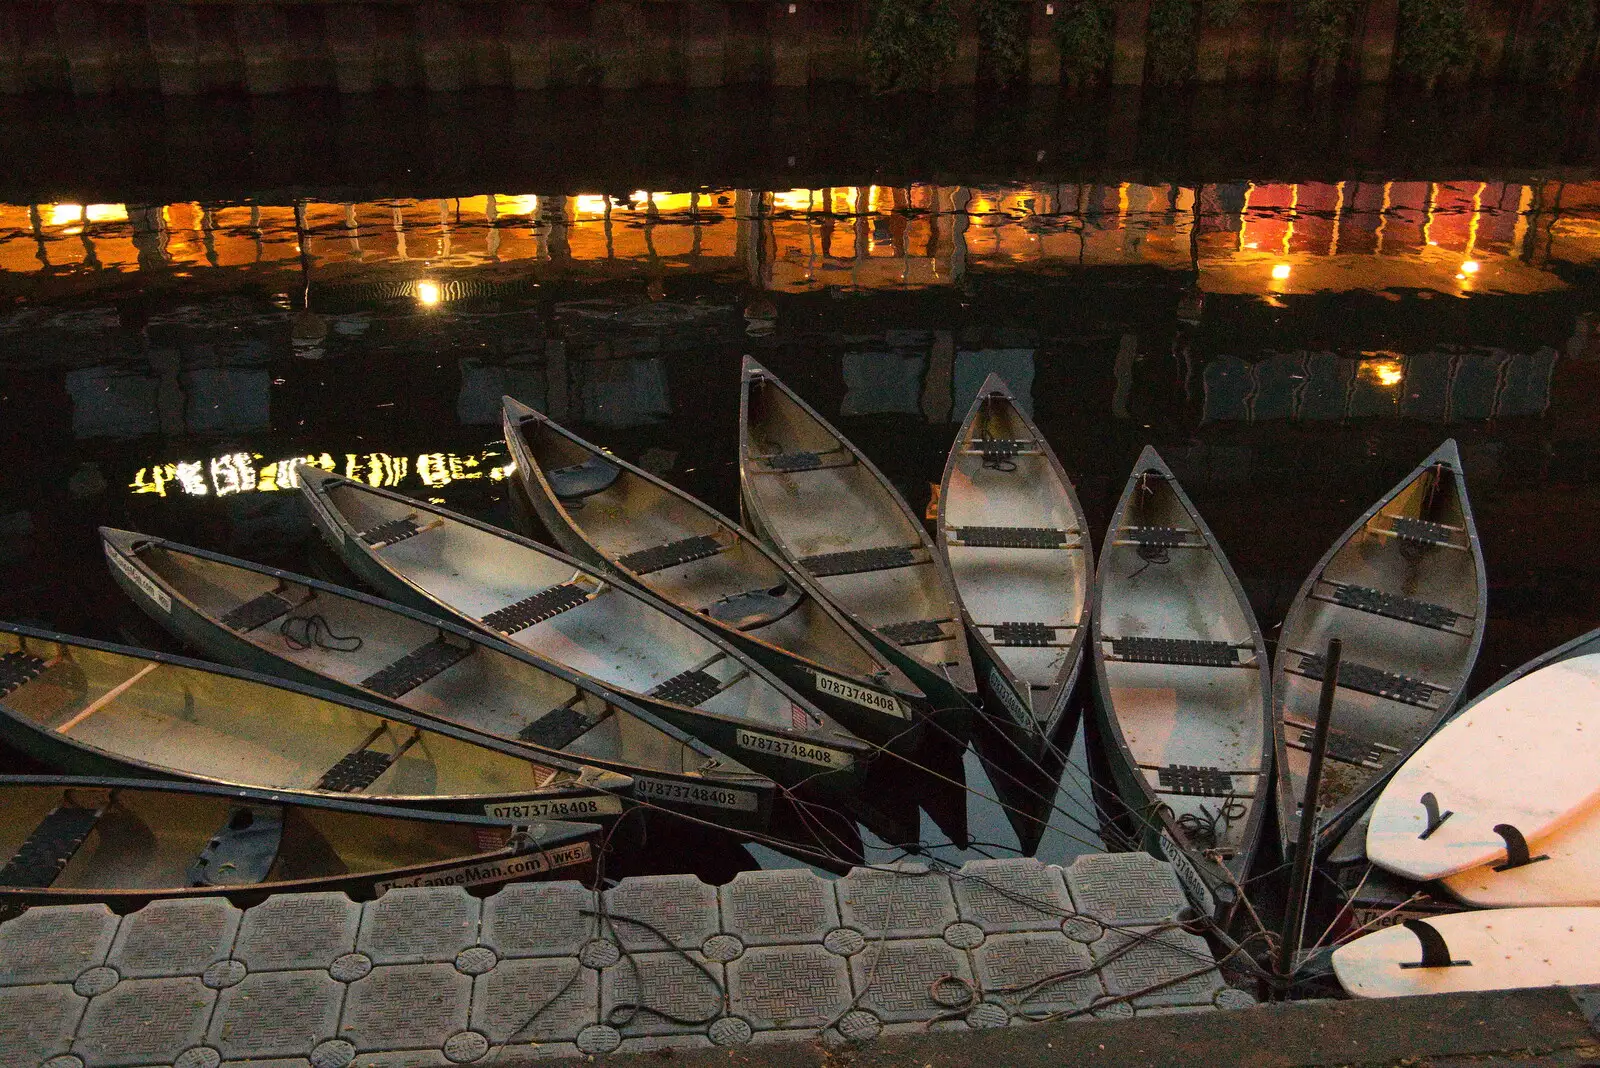 Nicely-arranged canoes on the river at Norwich, from A Trip to Nando's, Riverside, Norwich, Norfolk - 23rd July 2021